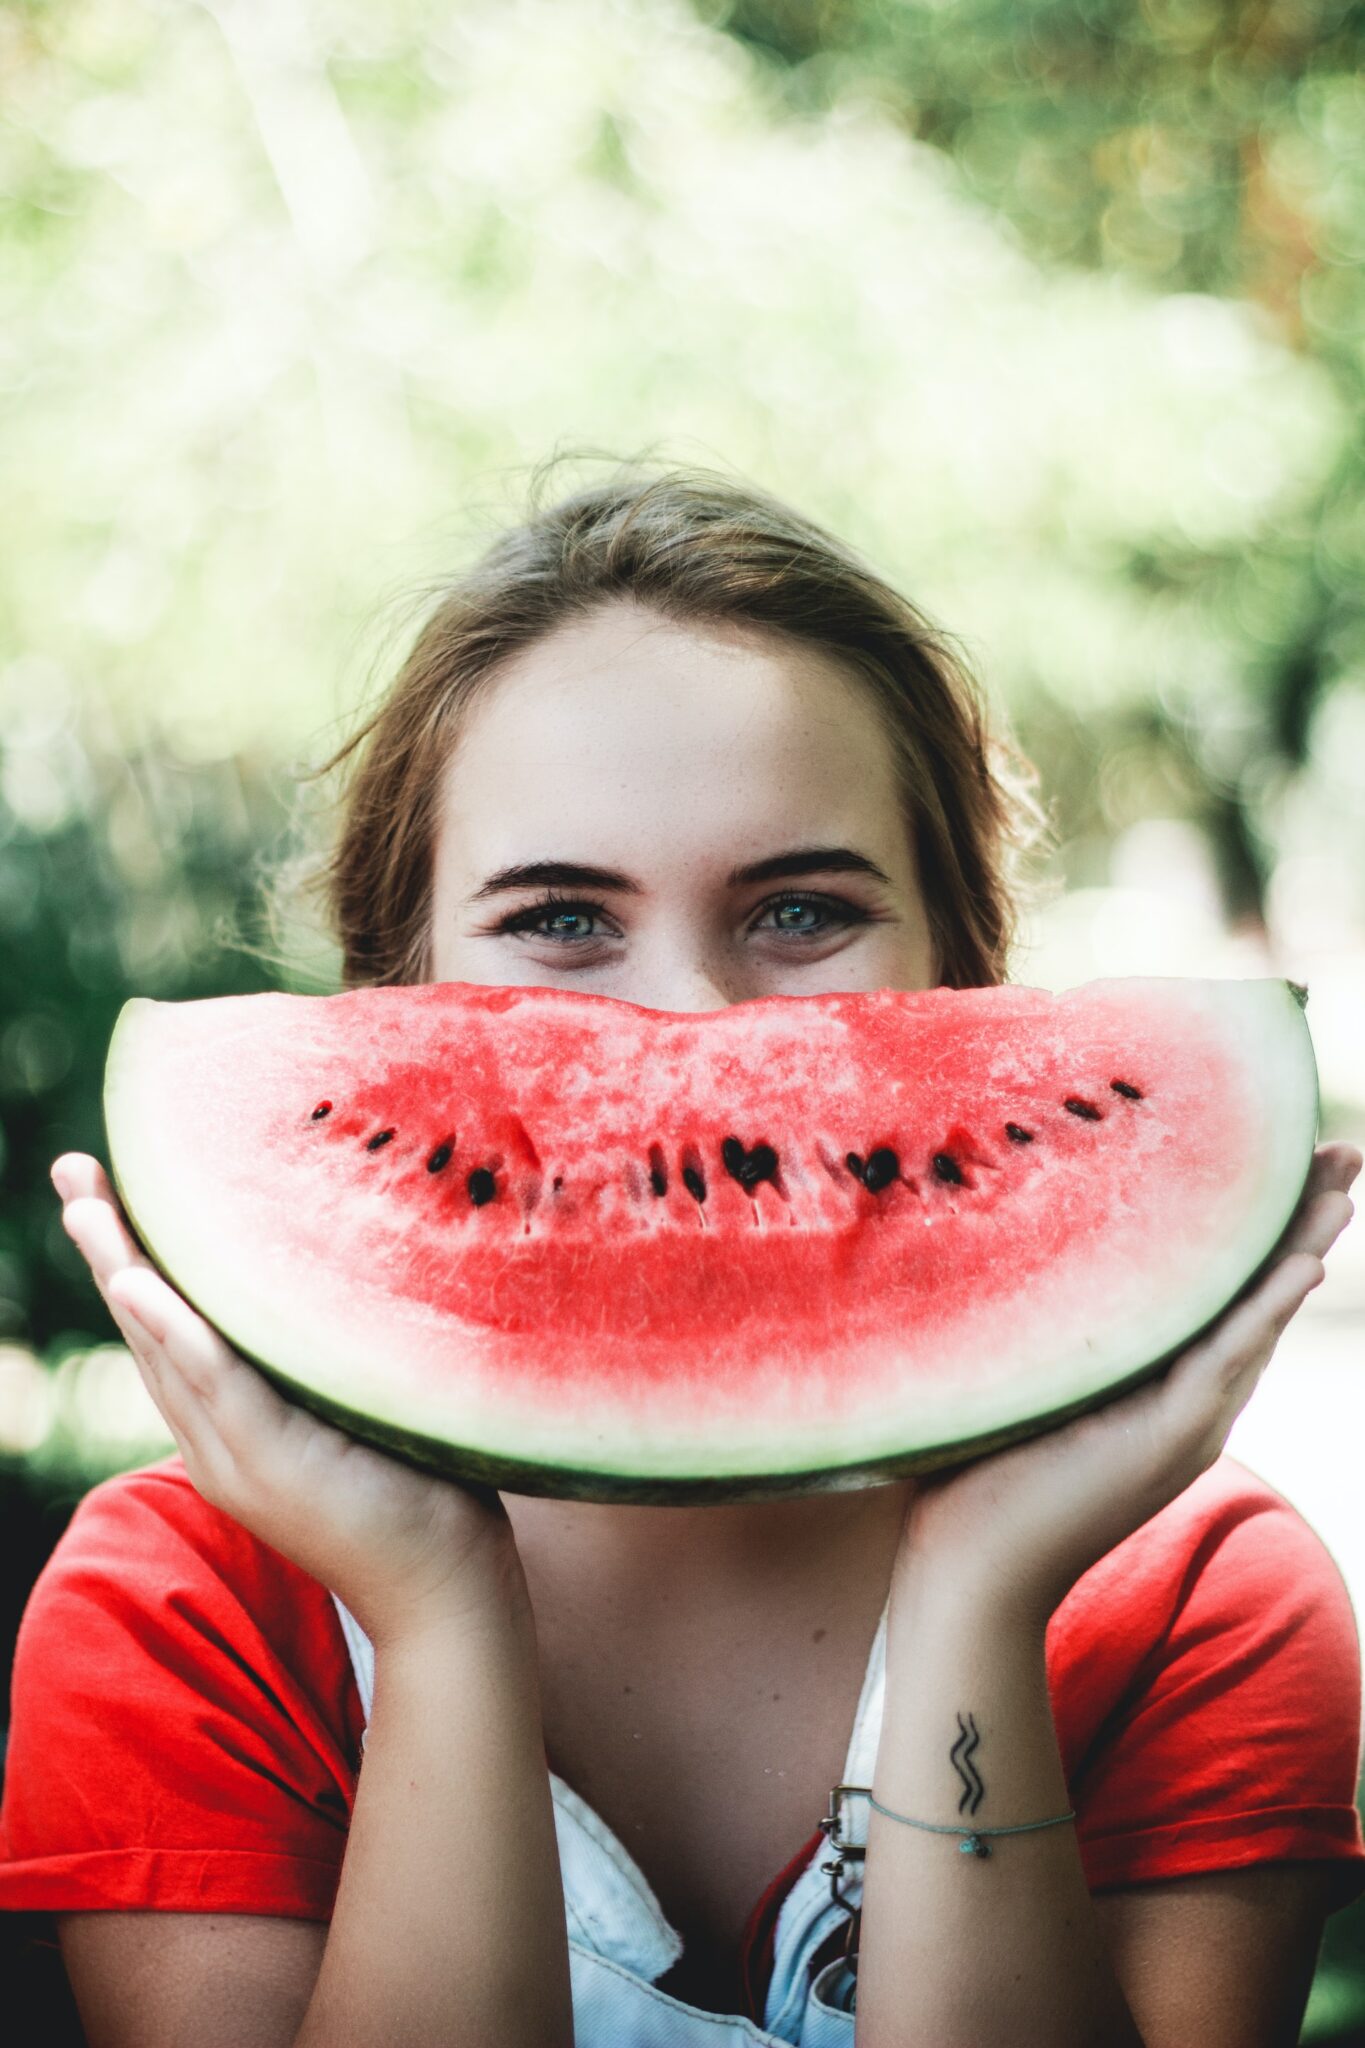 A woman holding a slice of watermelon up to her face, her eyes peeking over the top, pictured in a bright dental clinic.